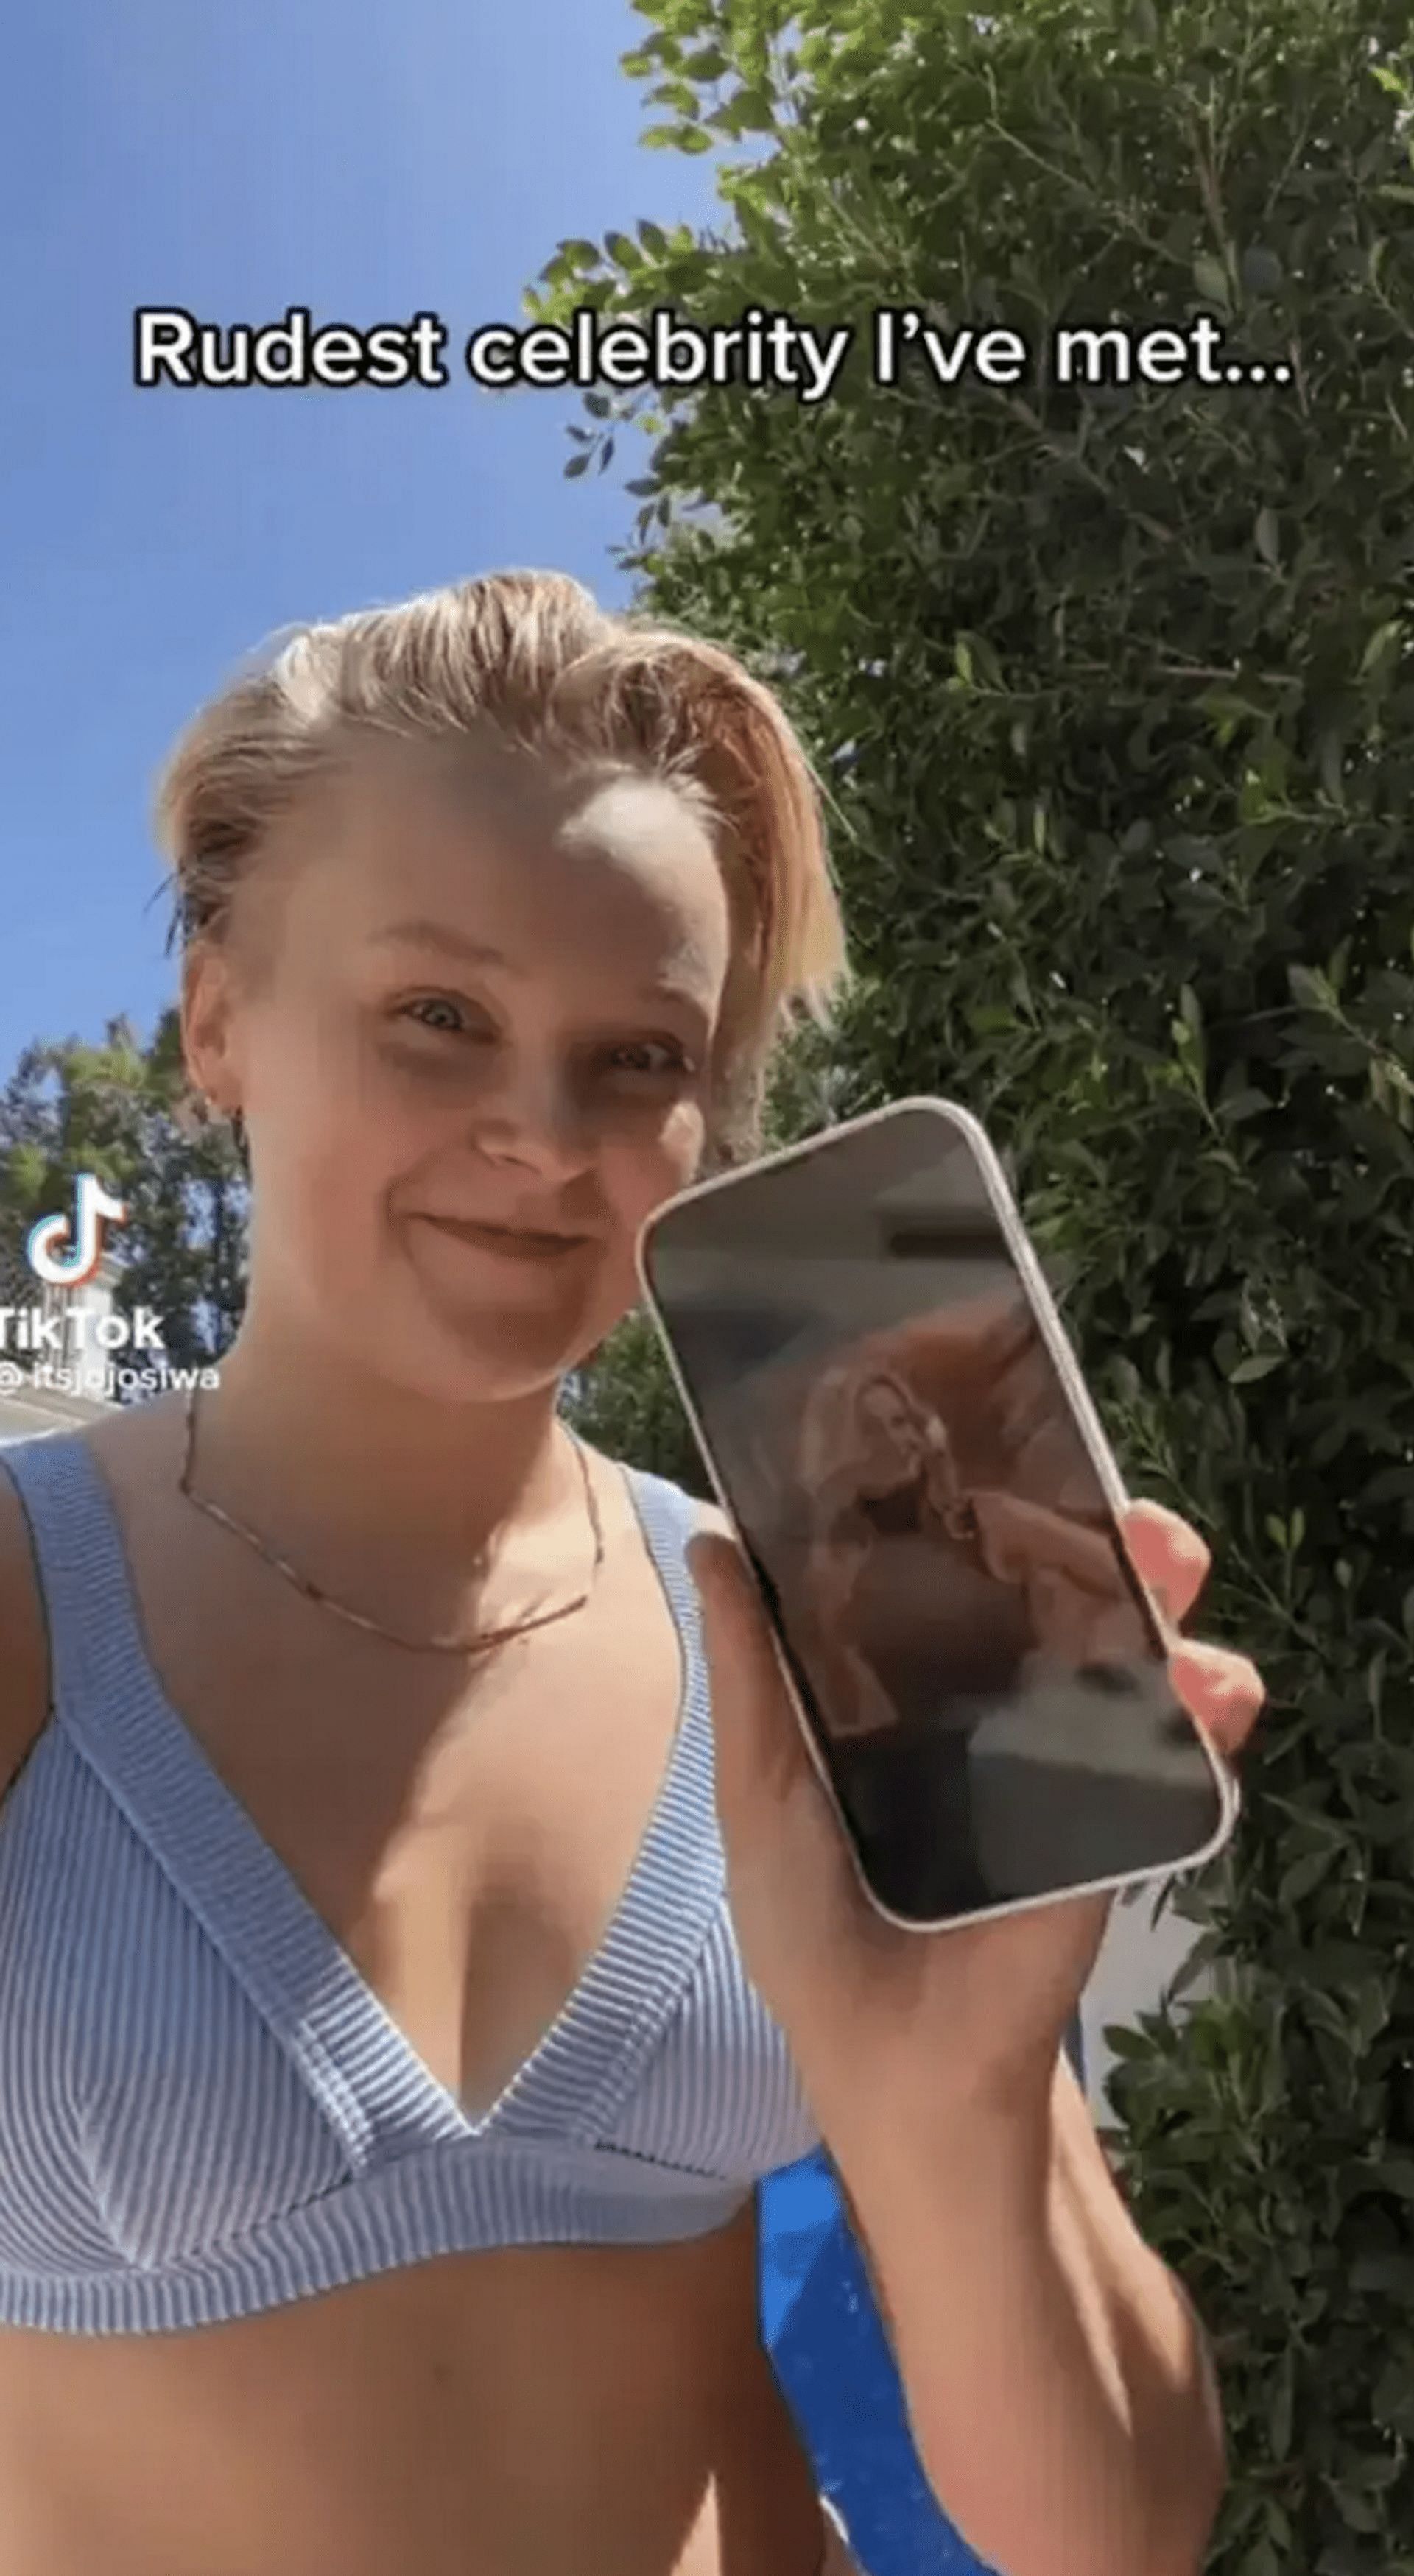 JoJo Siwa calls Candace the &quot;rudest&quot; celebrity due to an encounter she had with her at 11. (Image via TikTok)